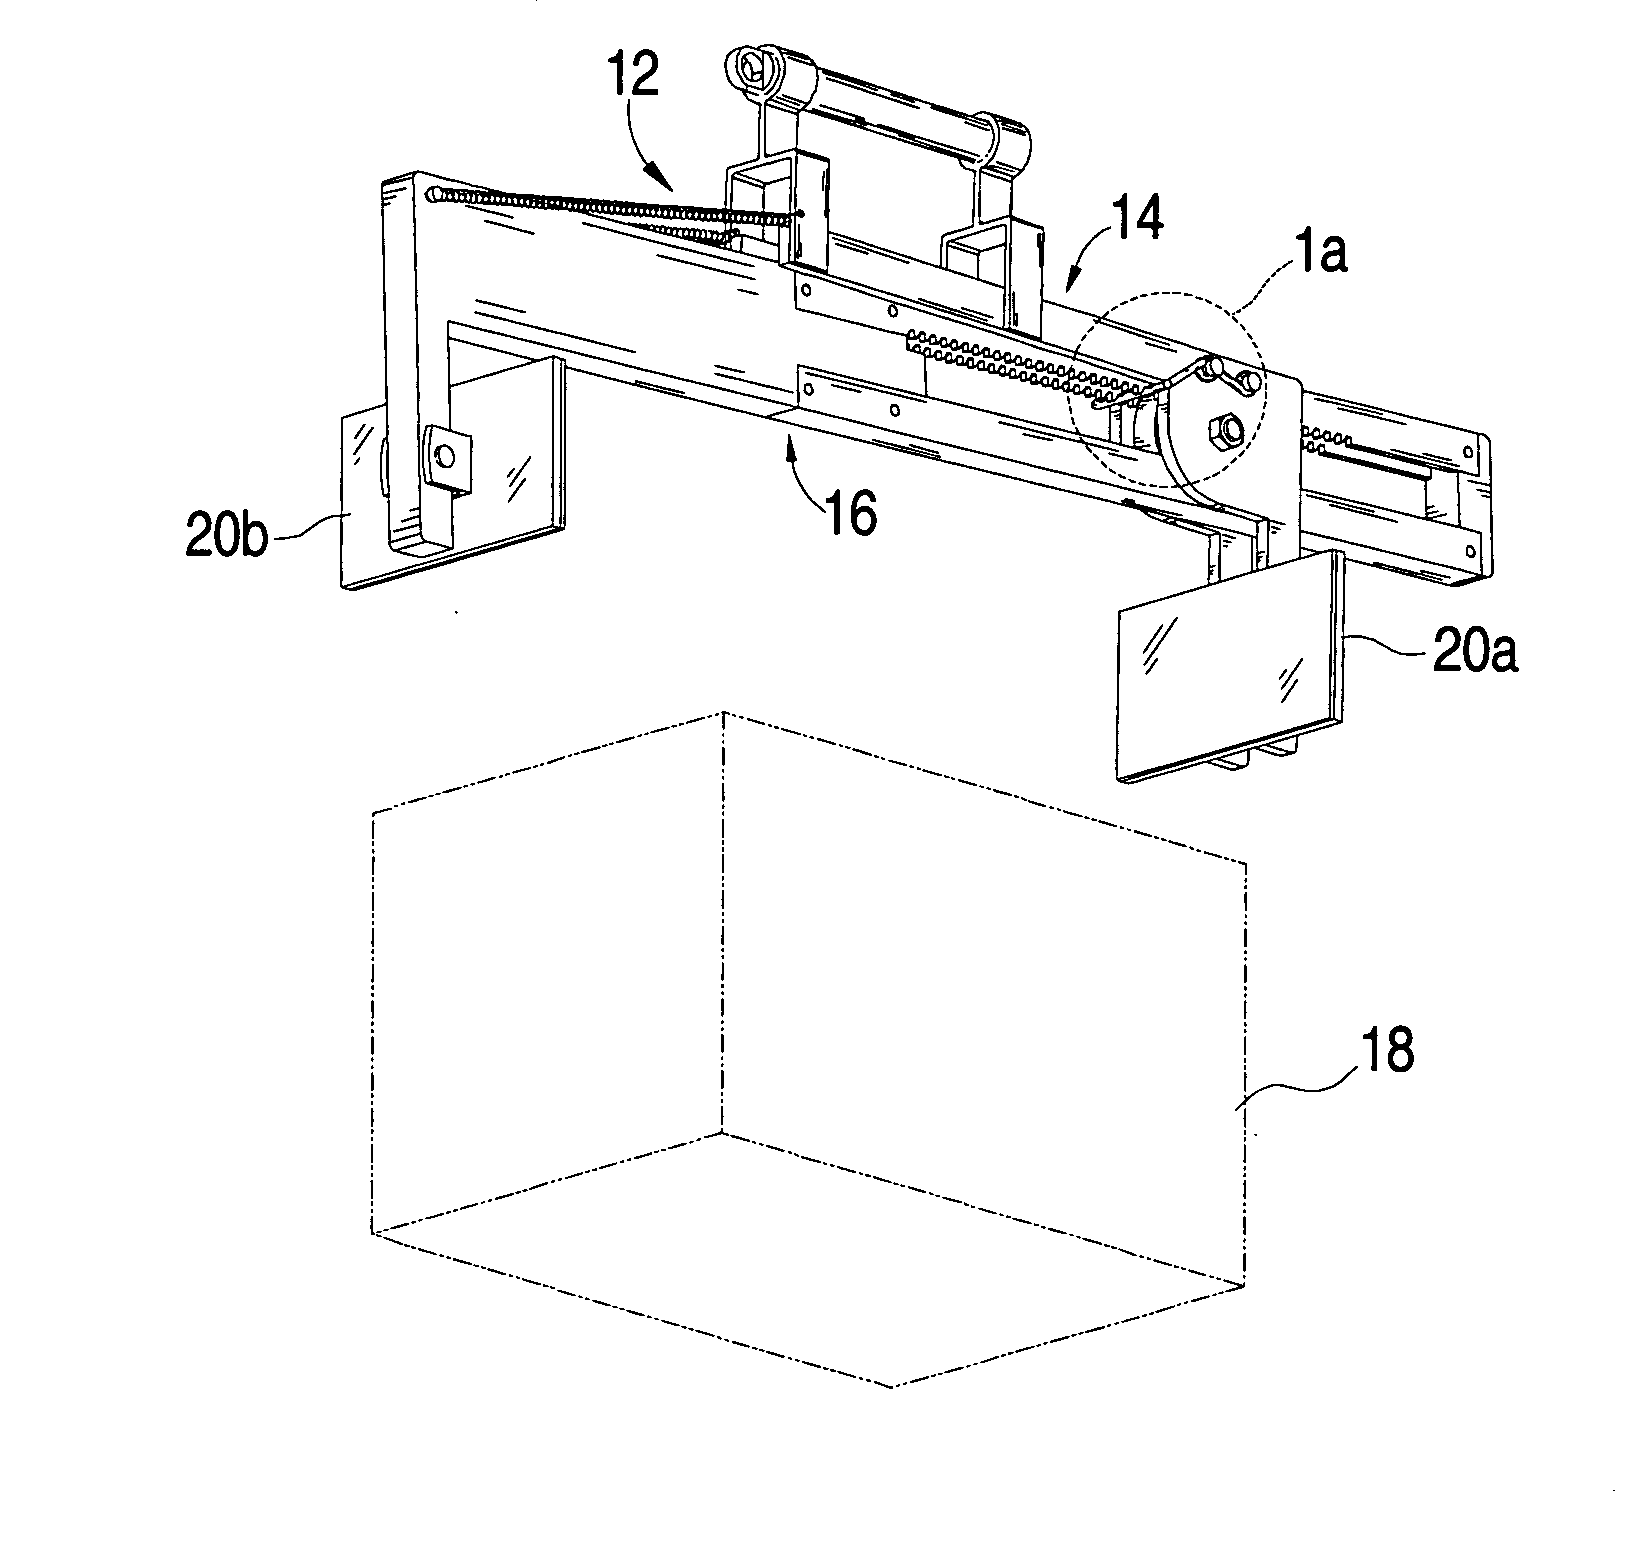 Single hand operated adjustable carrying device and method of use thereof